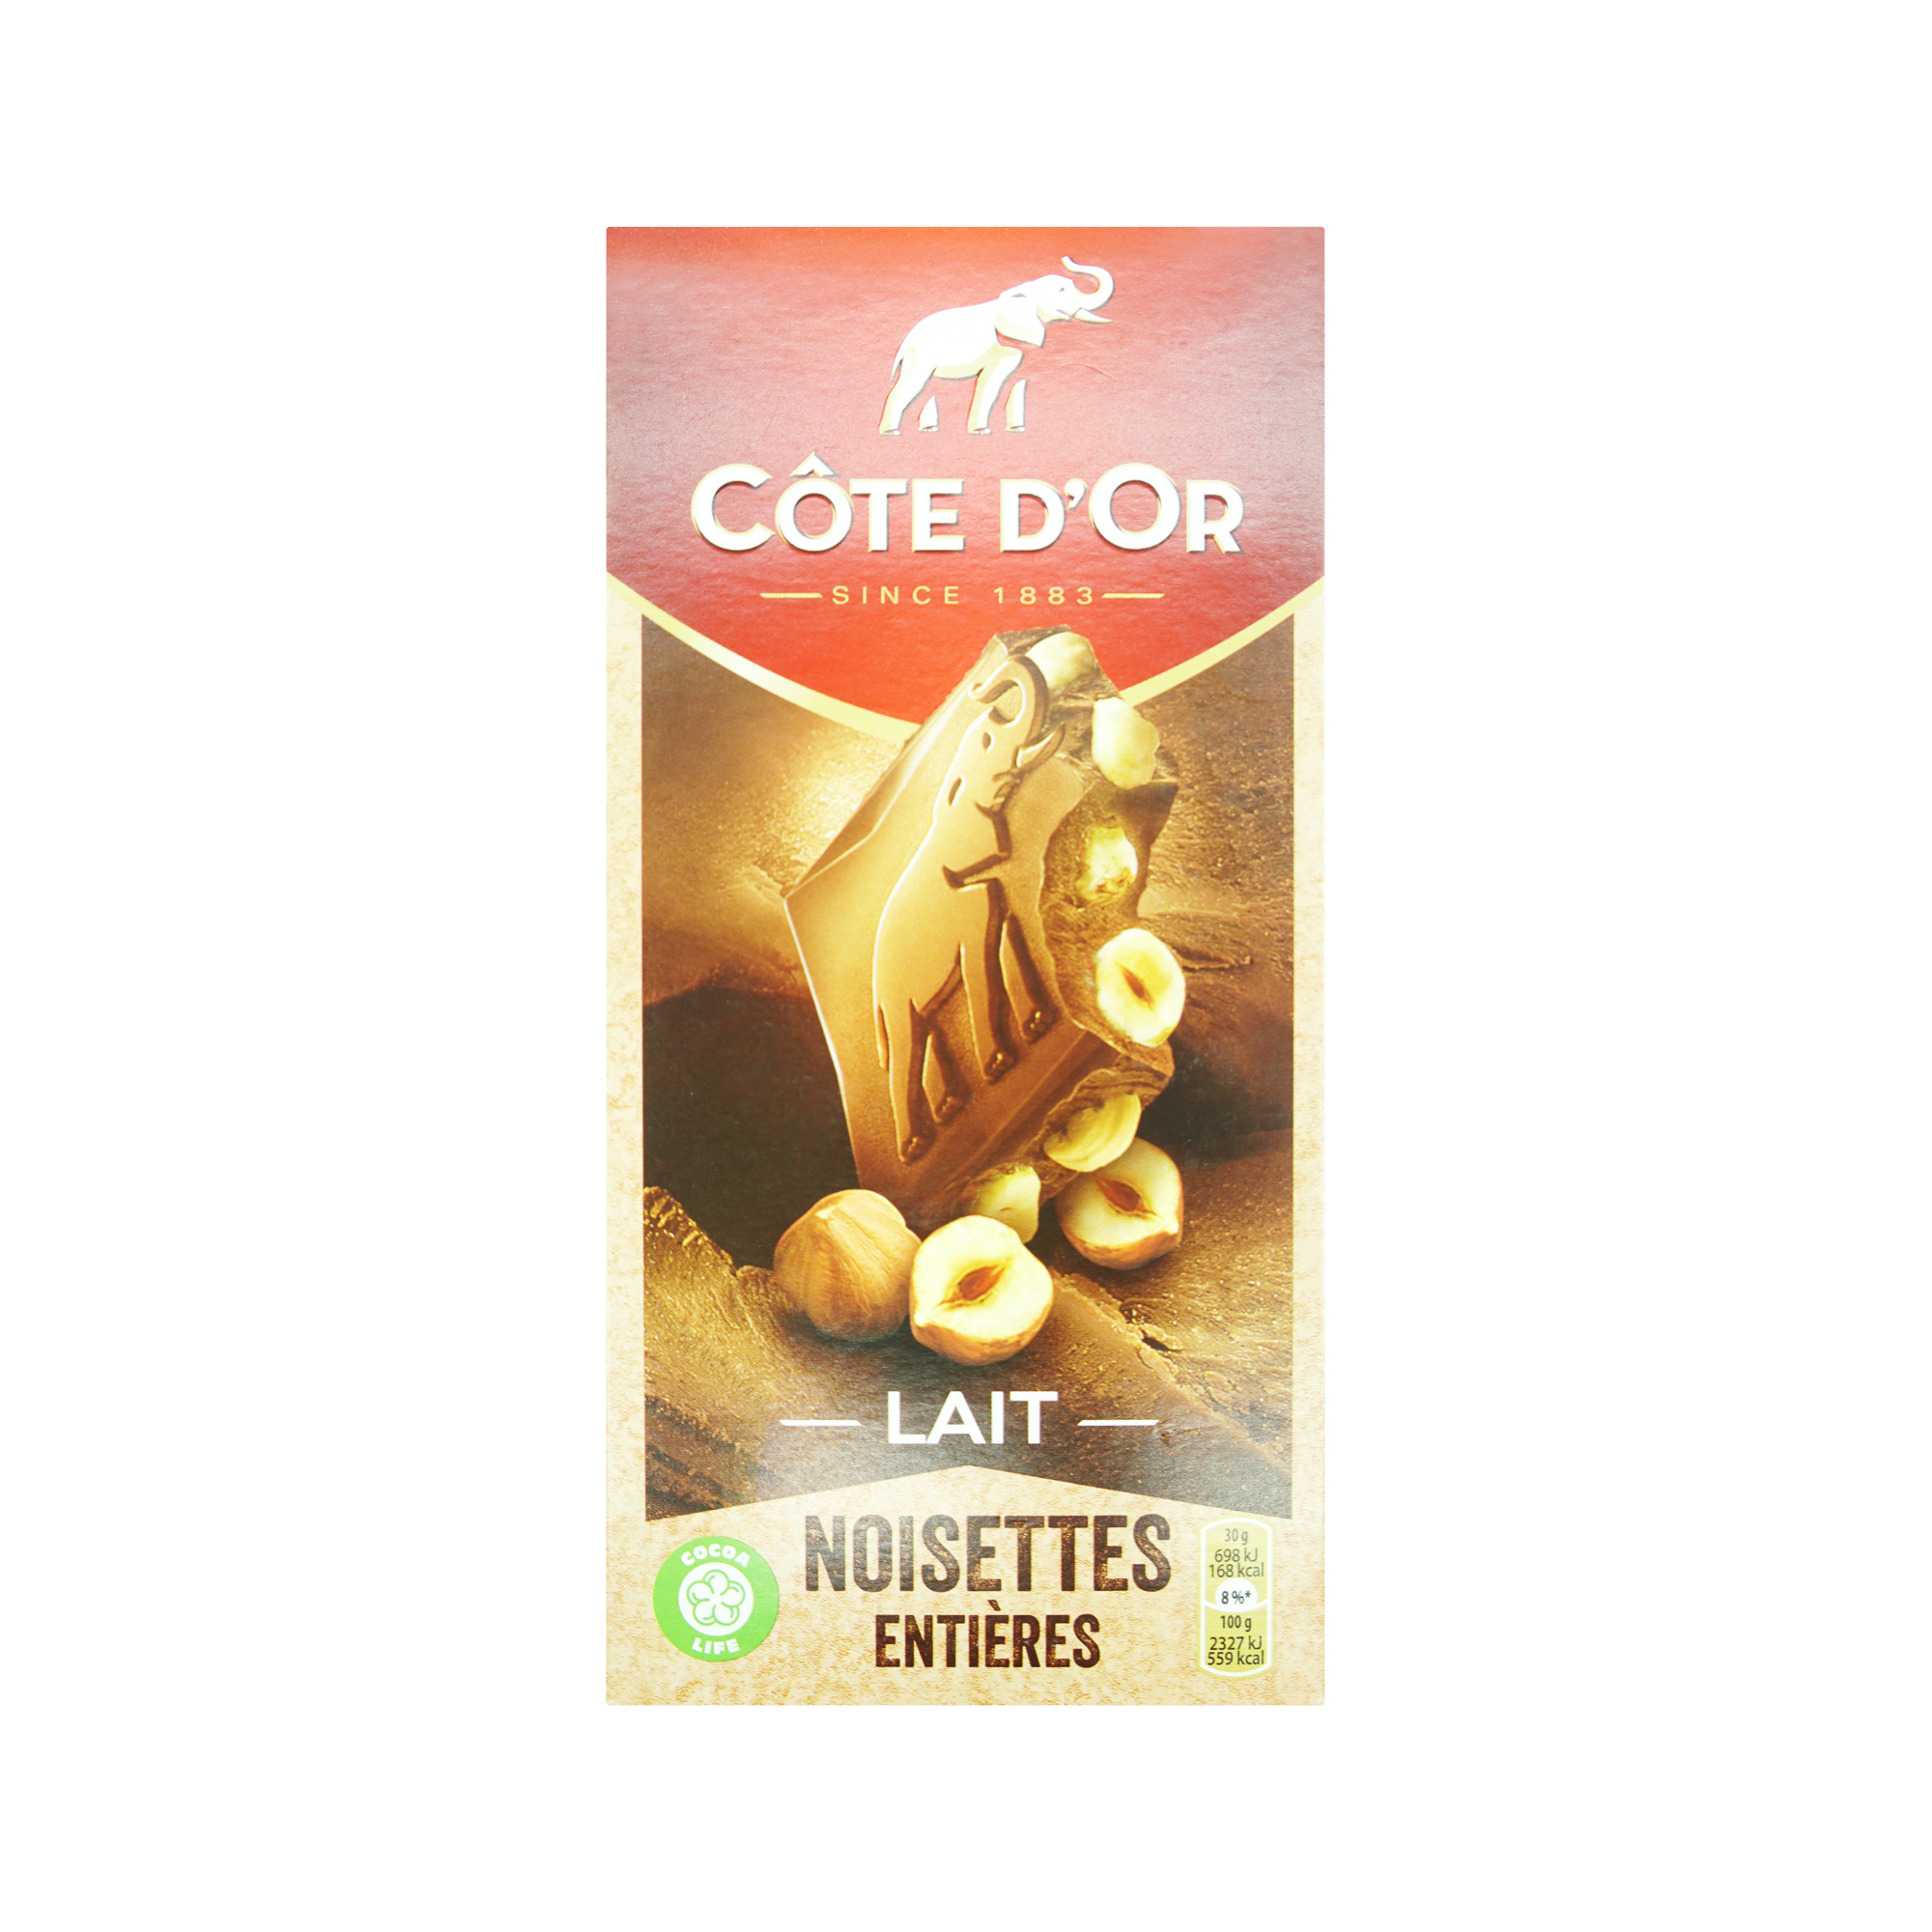 Cote d'Or Milk Chocolate with Hazelnuts (180g)